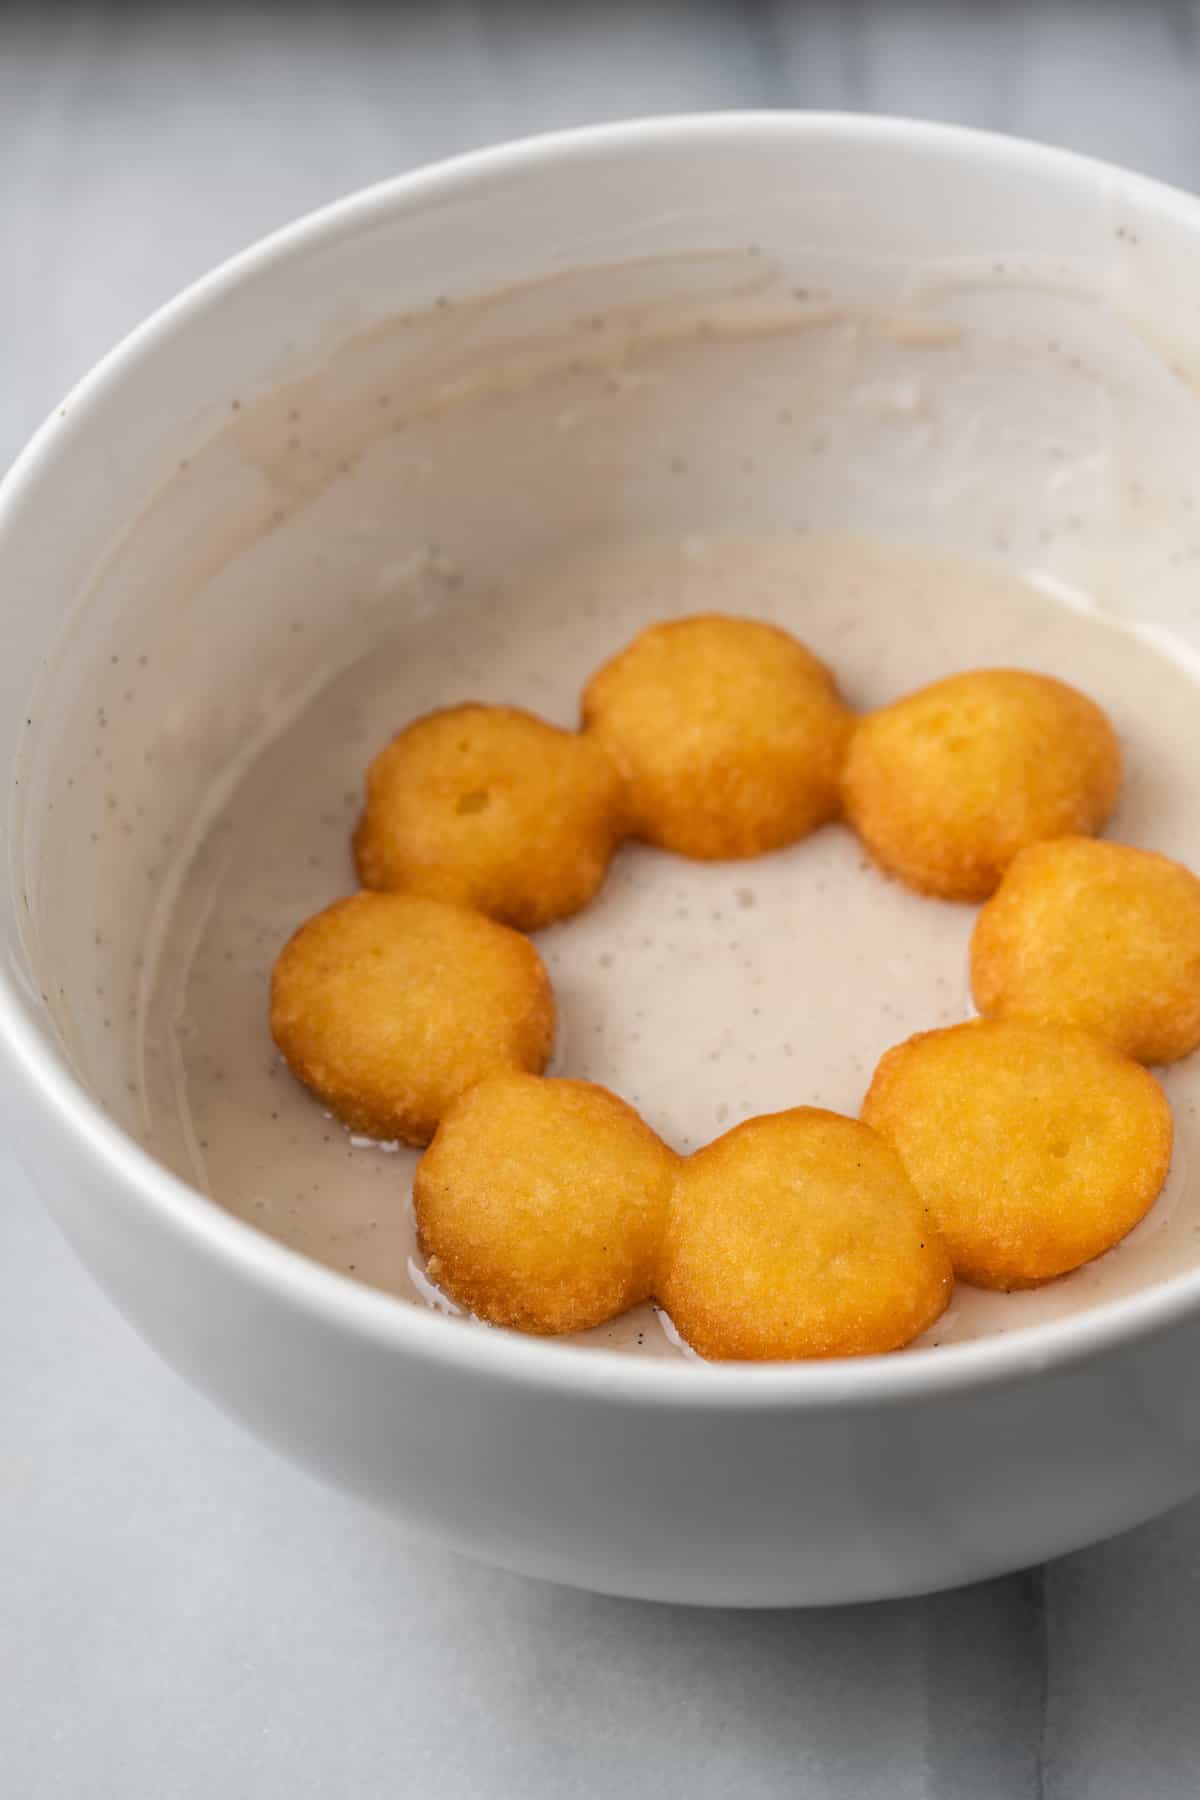 A gluten-free mochi donut deep frying in a skillet with oil.